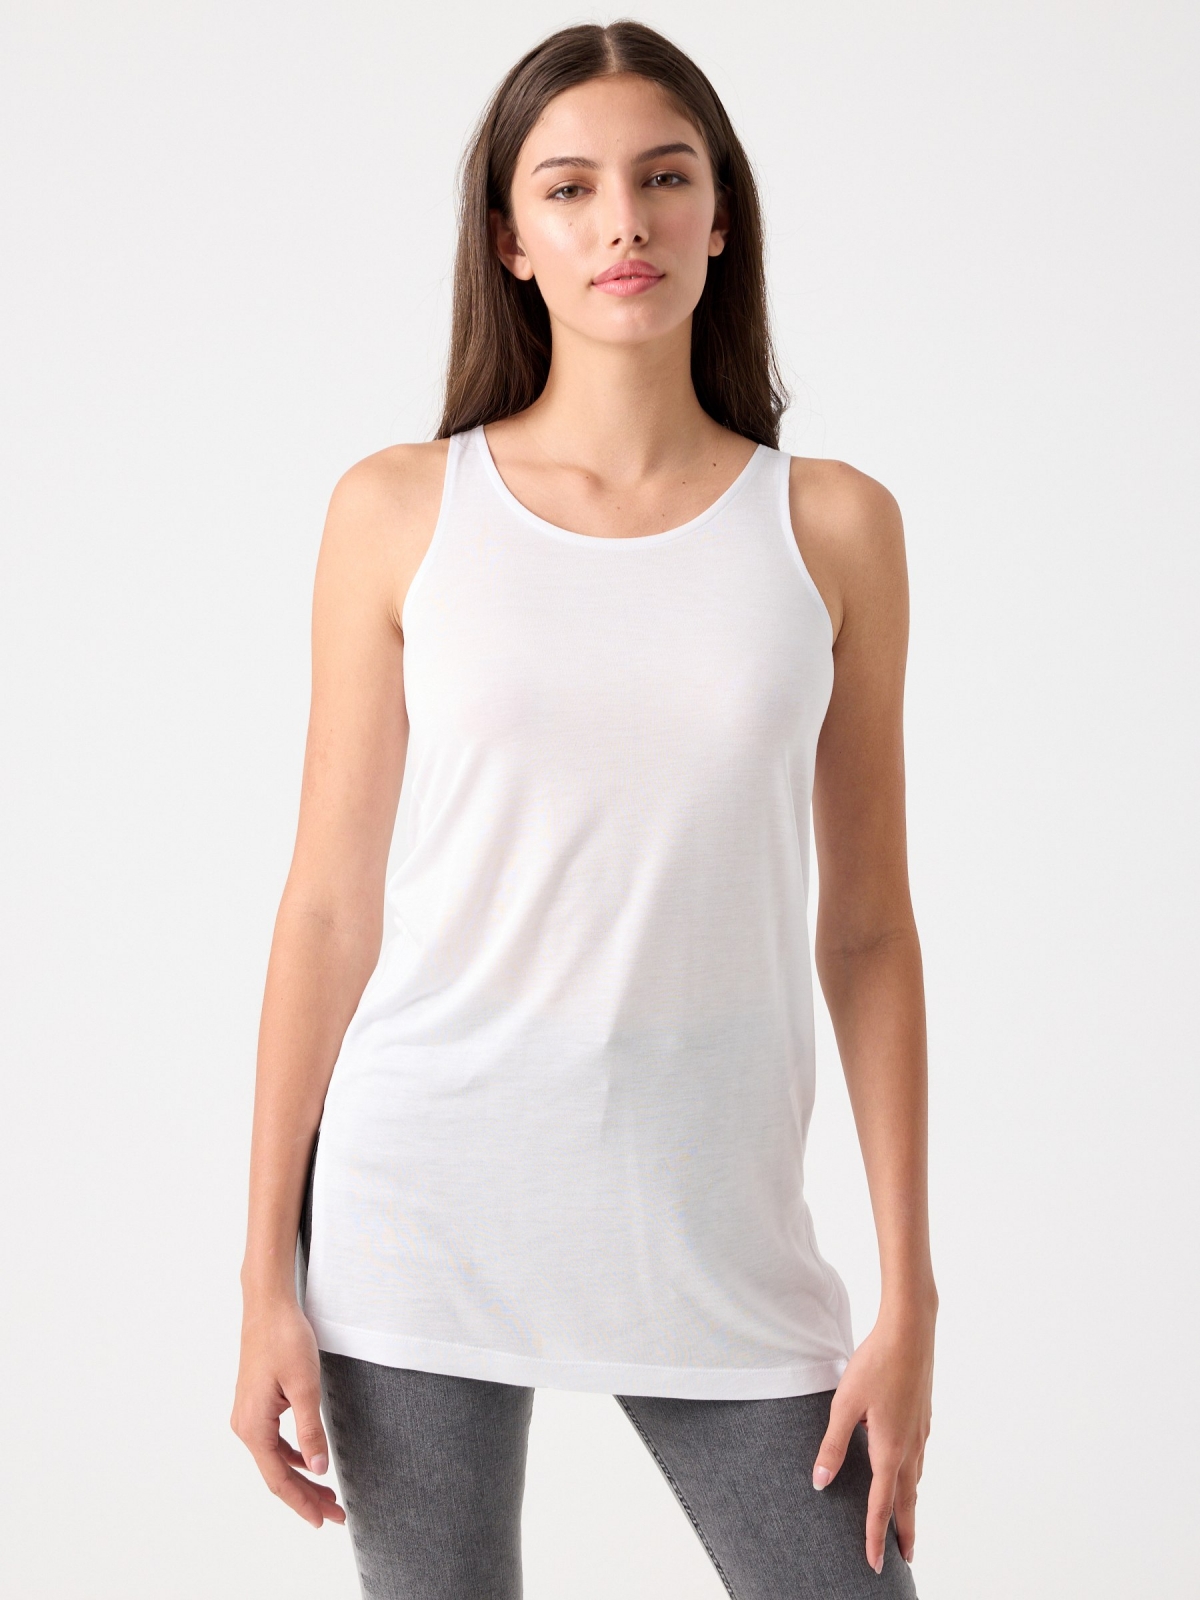 Long t-shirt with side slits white middle front view